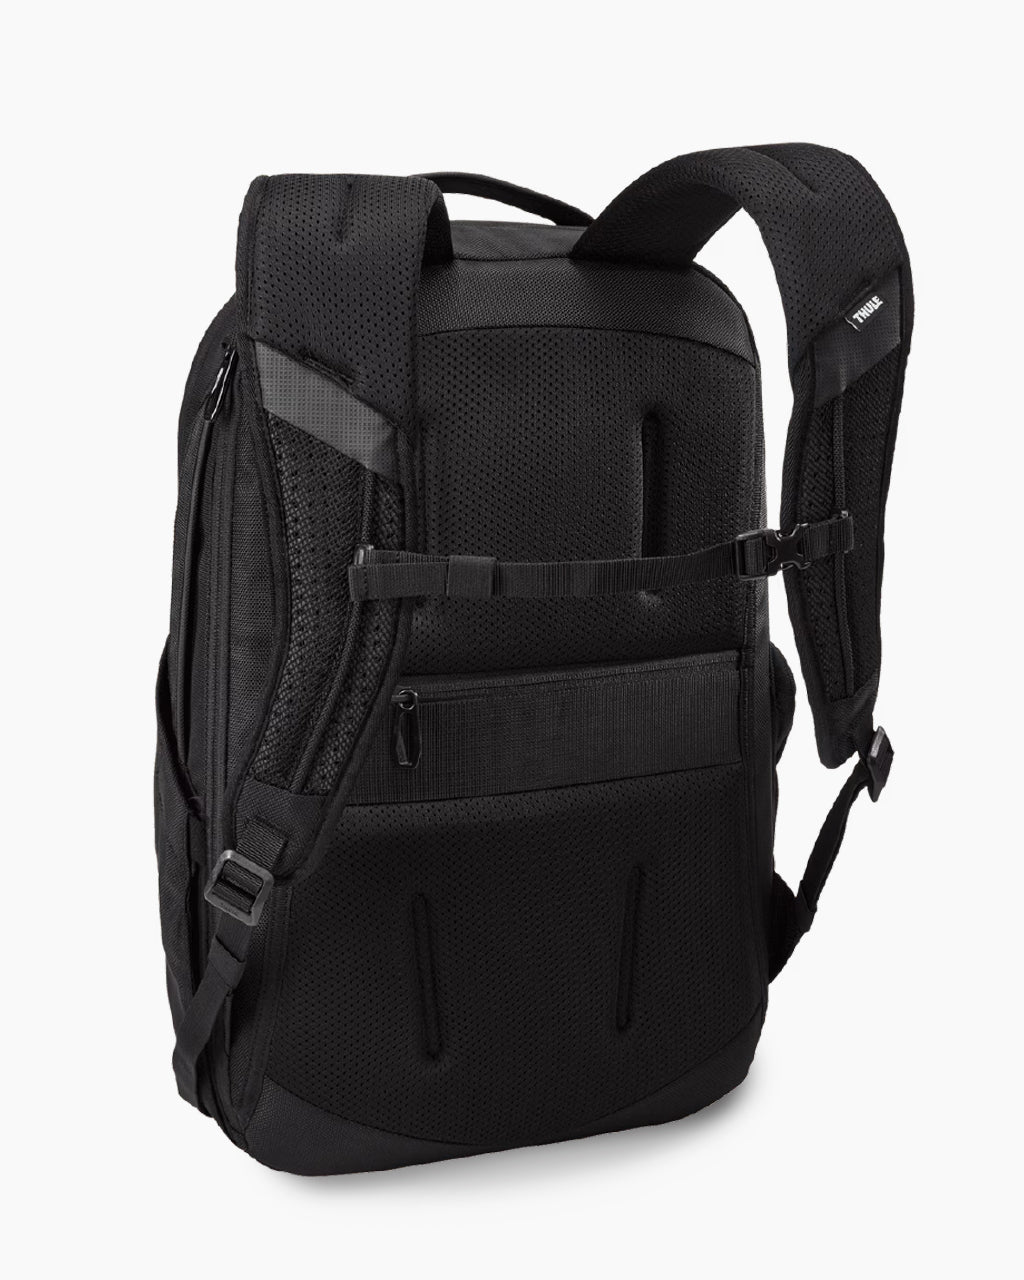 Thule Accent Backpack 23L 26L Laptop Protects Bag Rugged MacBook Tablet  Daypack